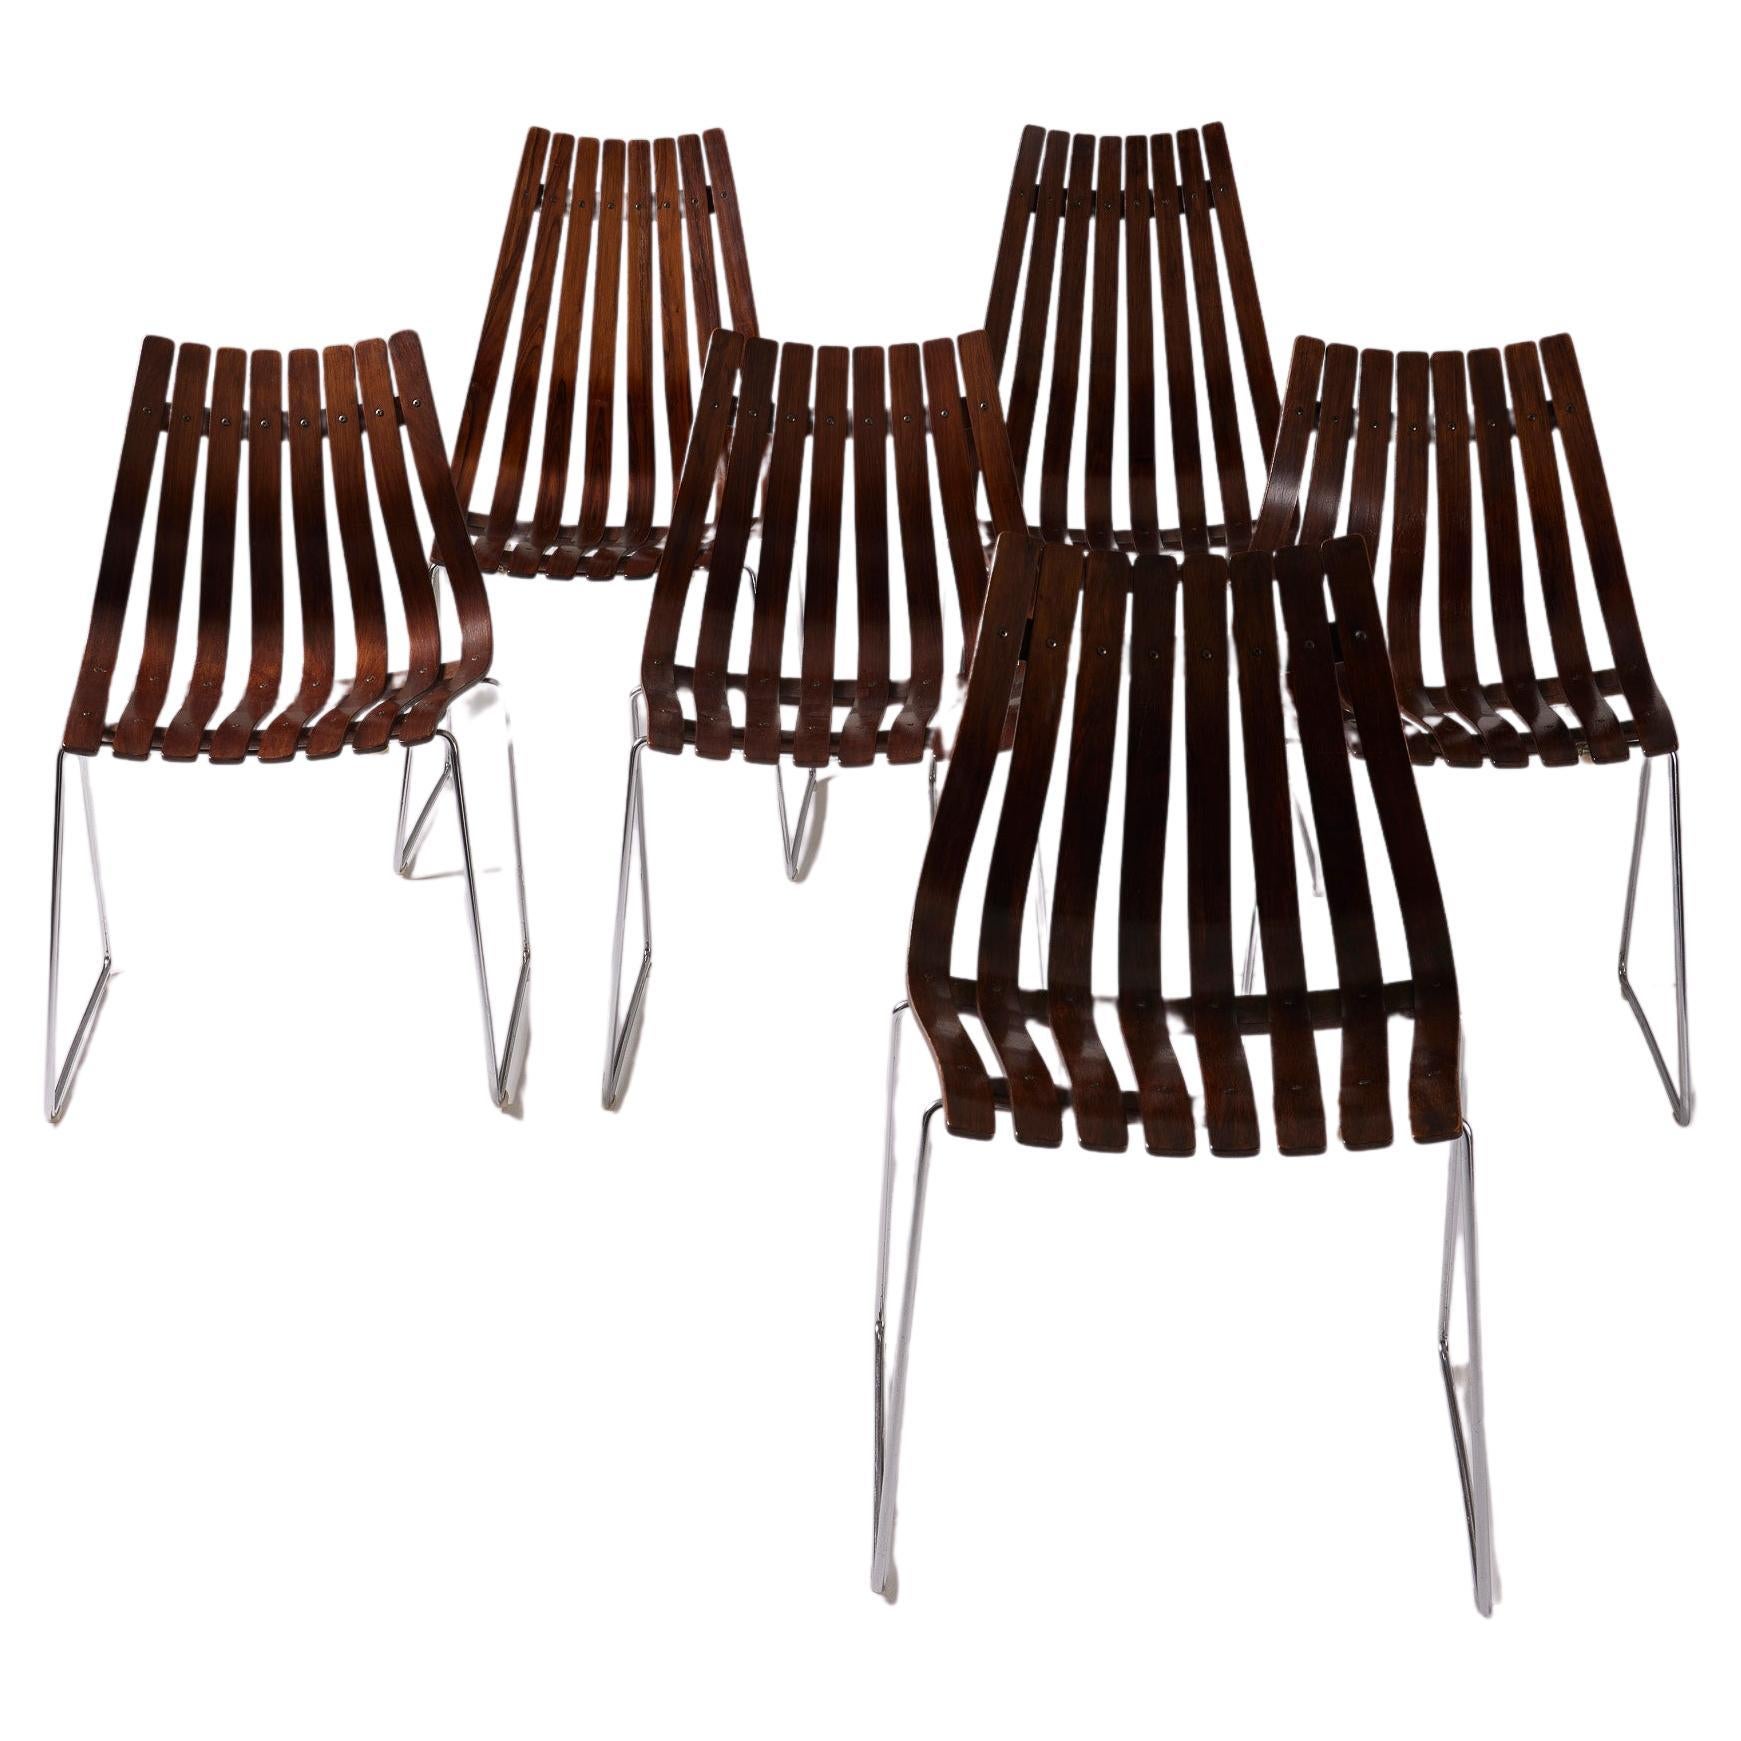  Set of 6 wooden chairs by Hans Brattrud For Sale